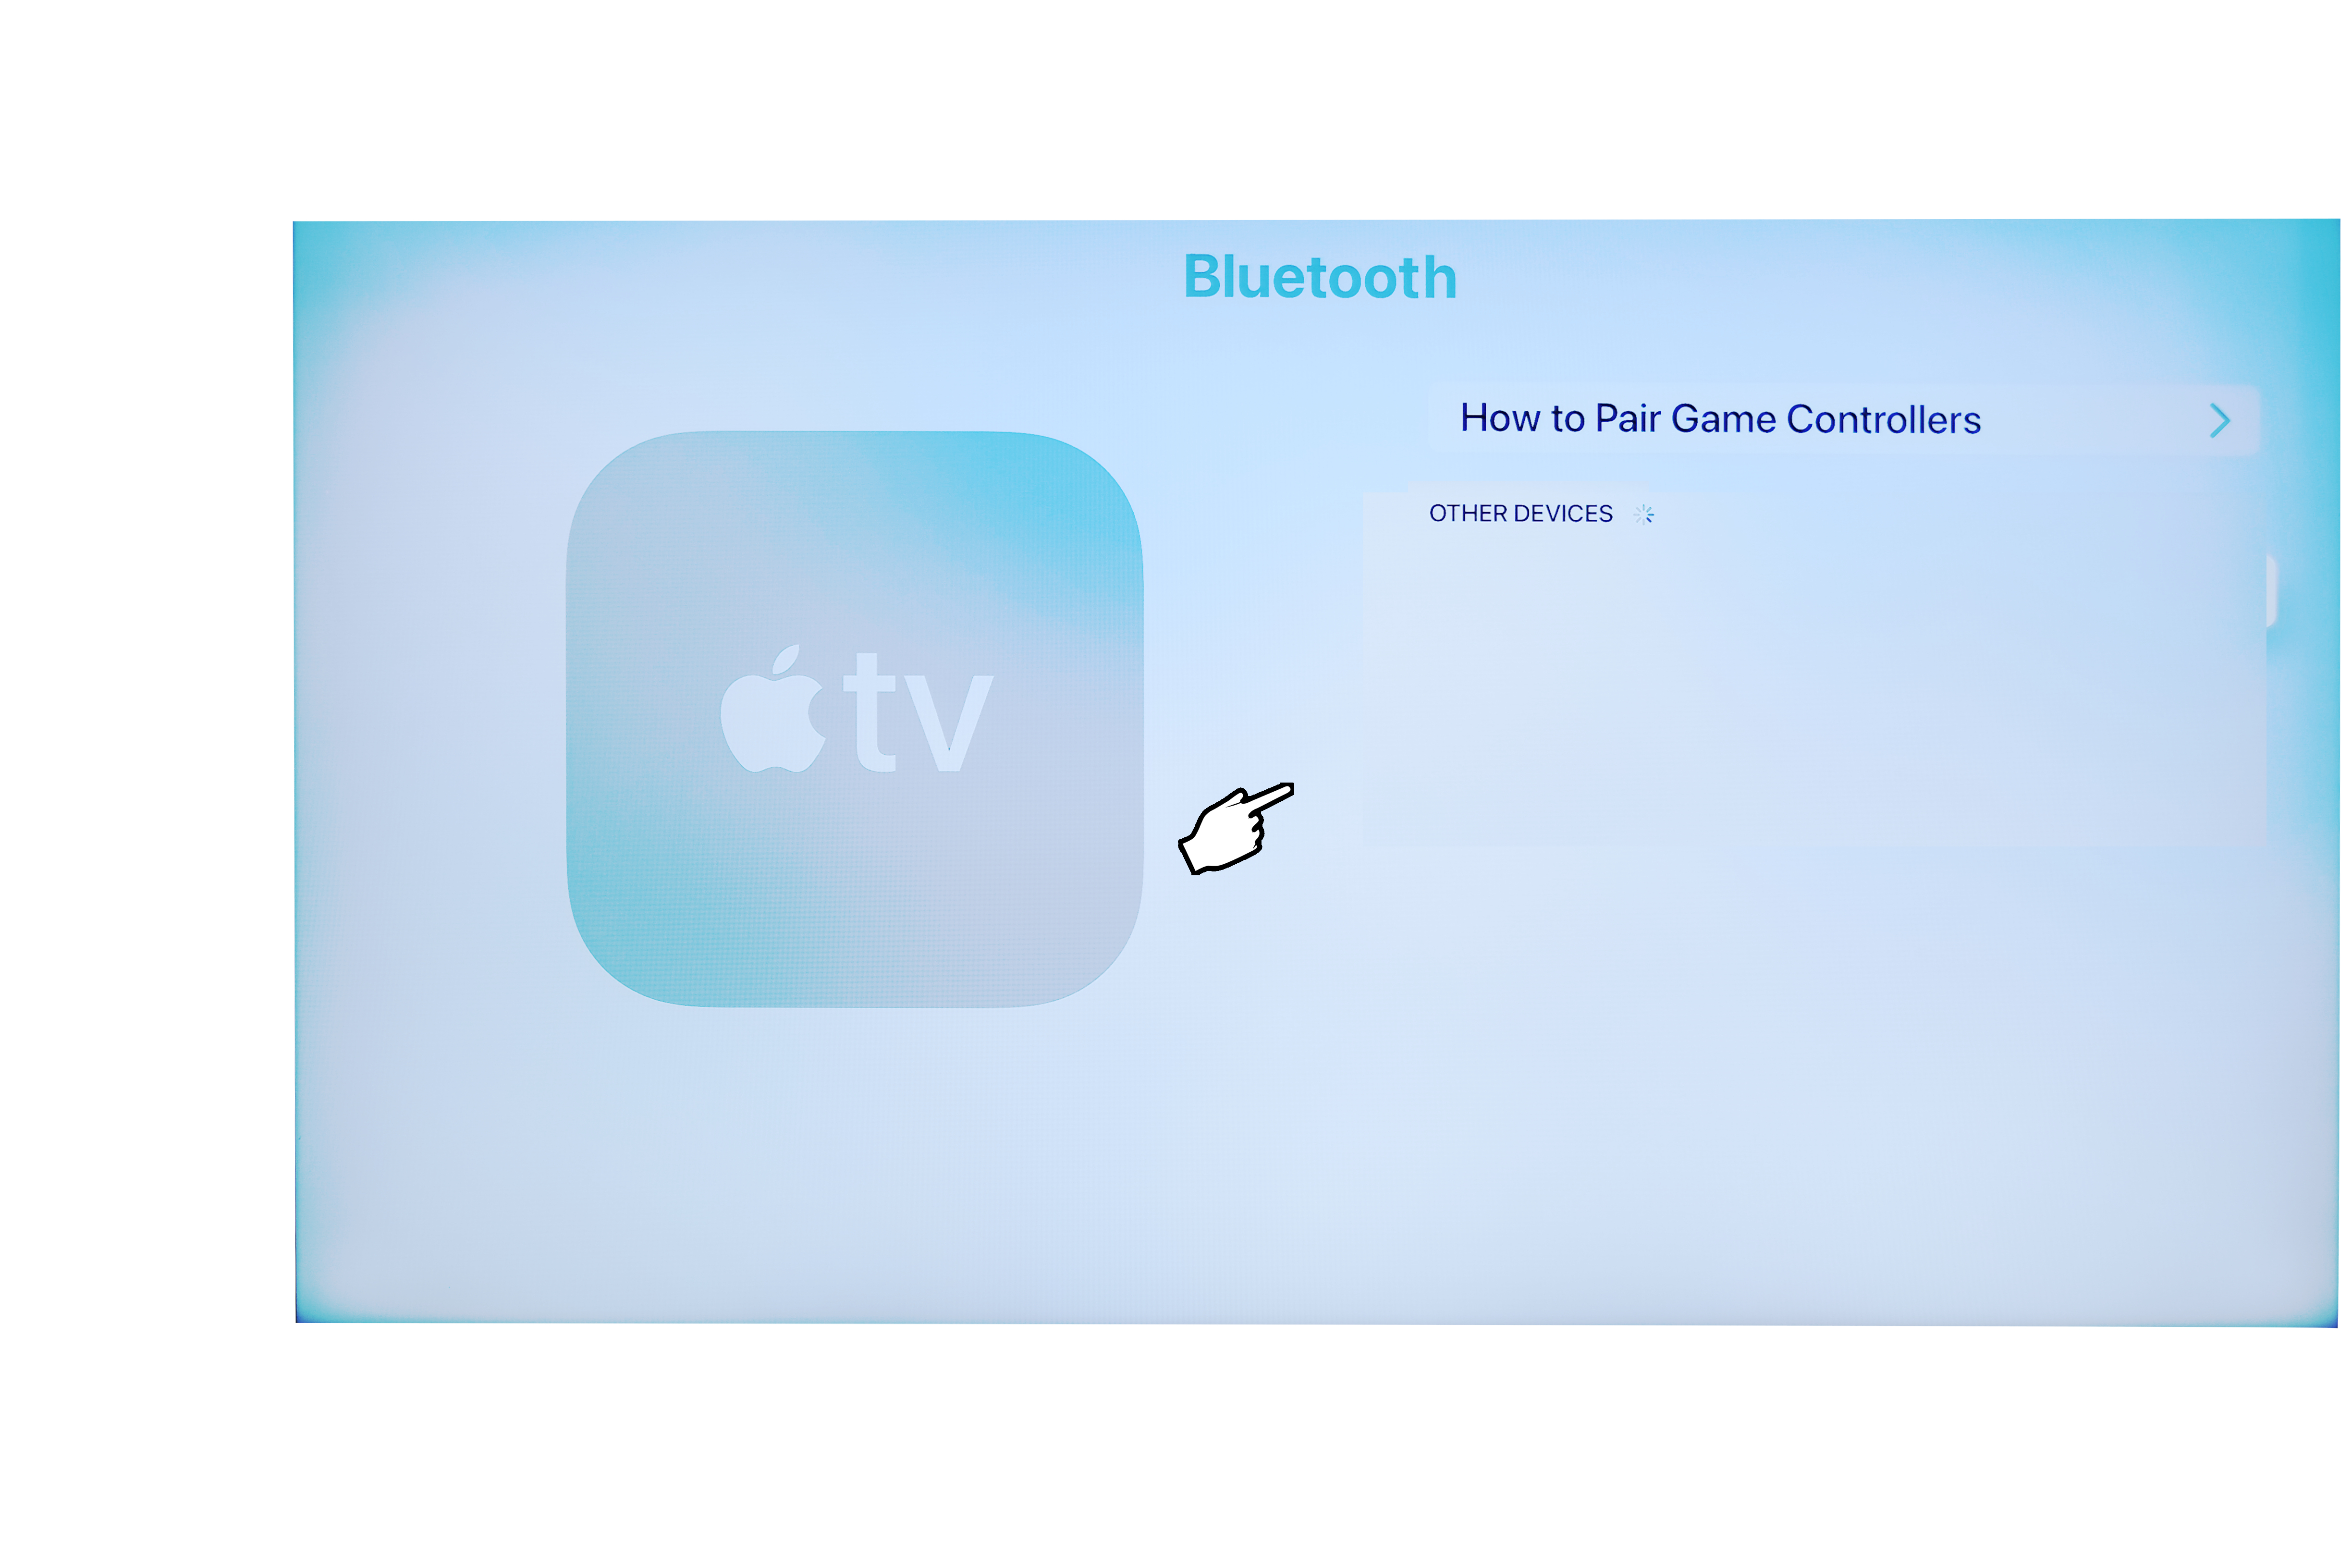 Apple TV search for Bluetooth devices